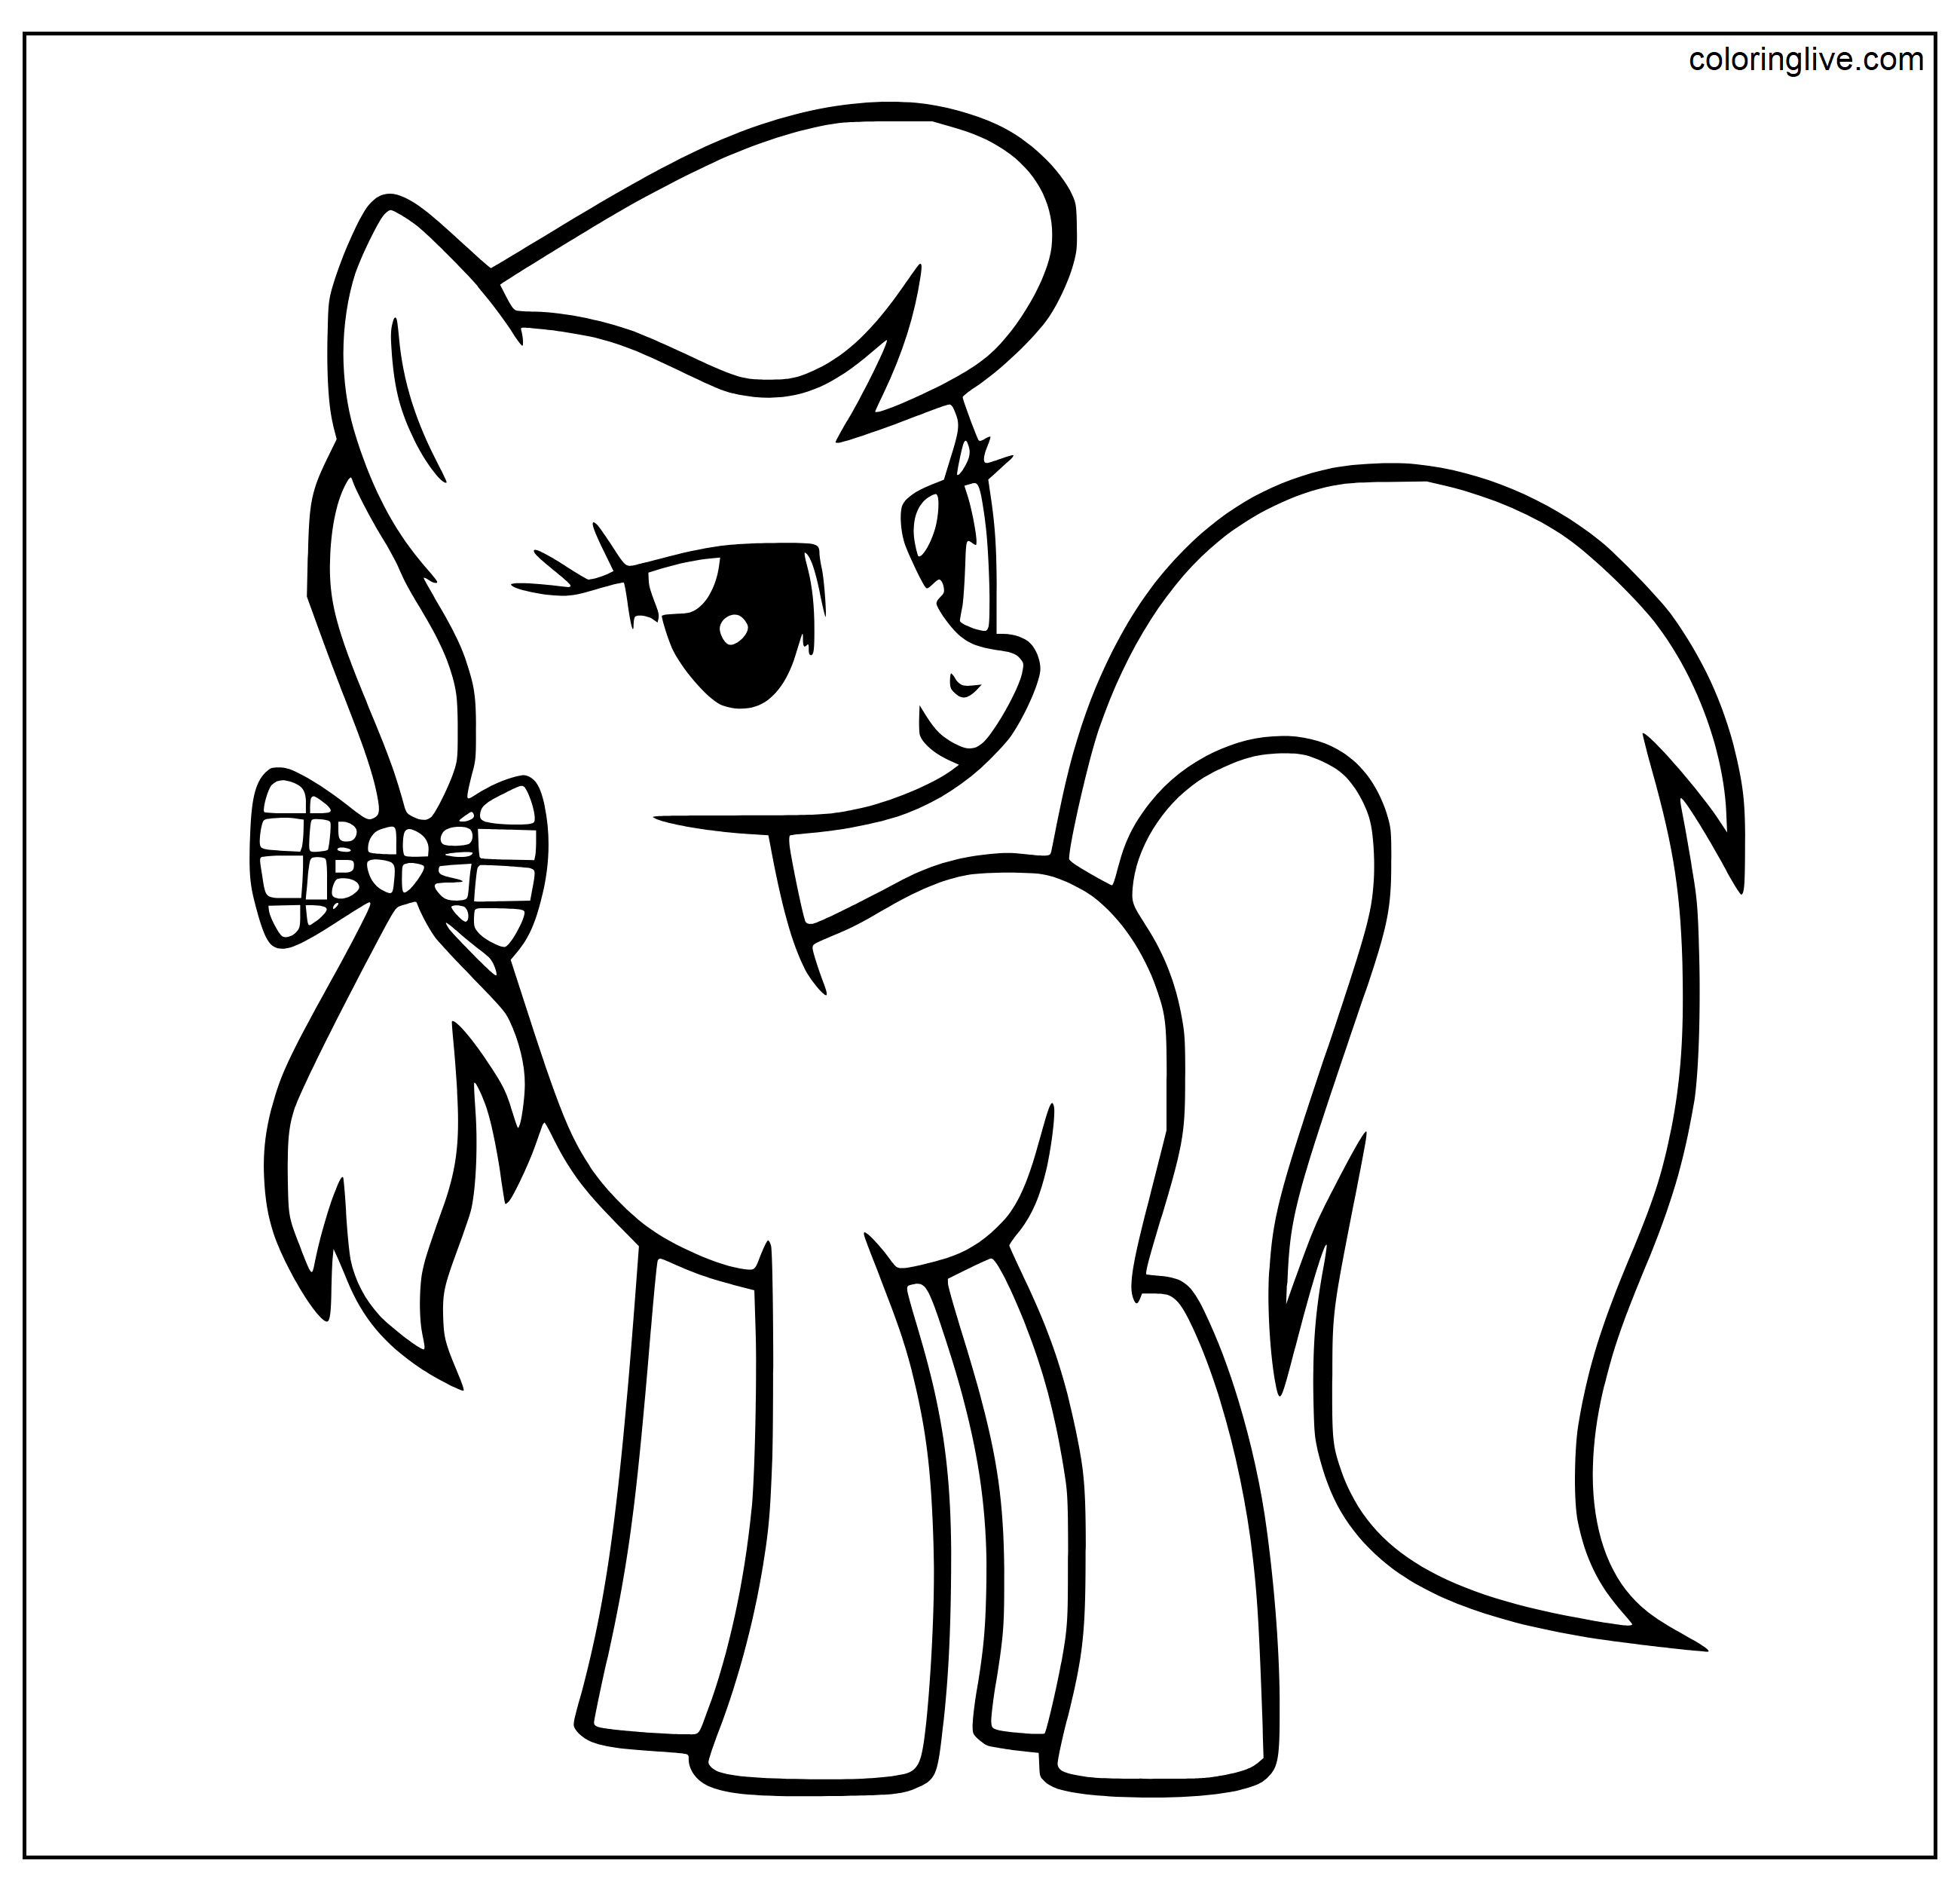 Printable MLP Little Pony Bowknot Coloring Page for kids.